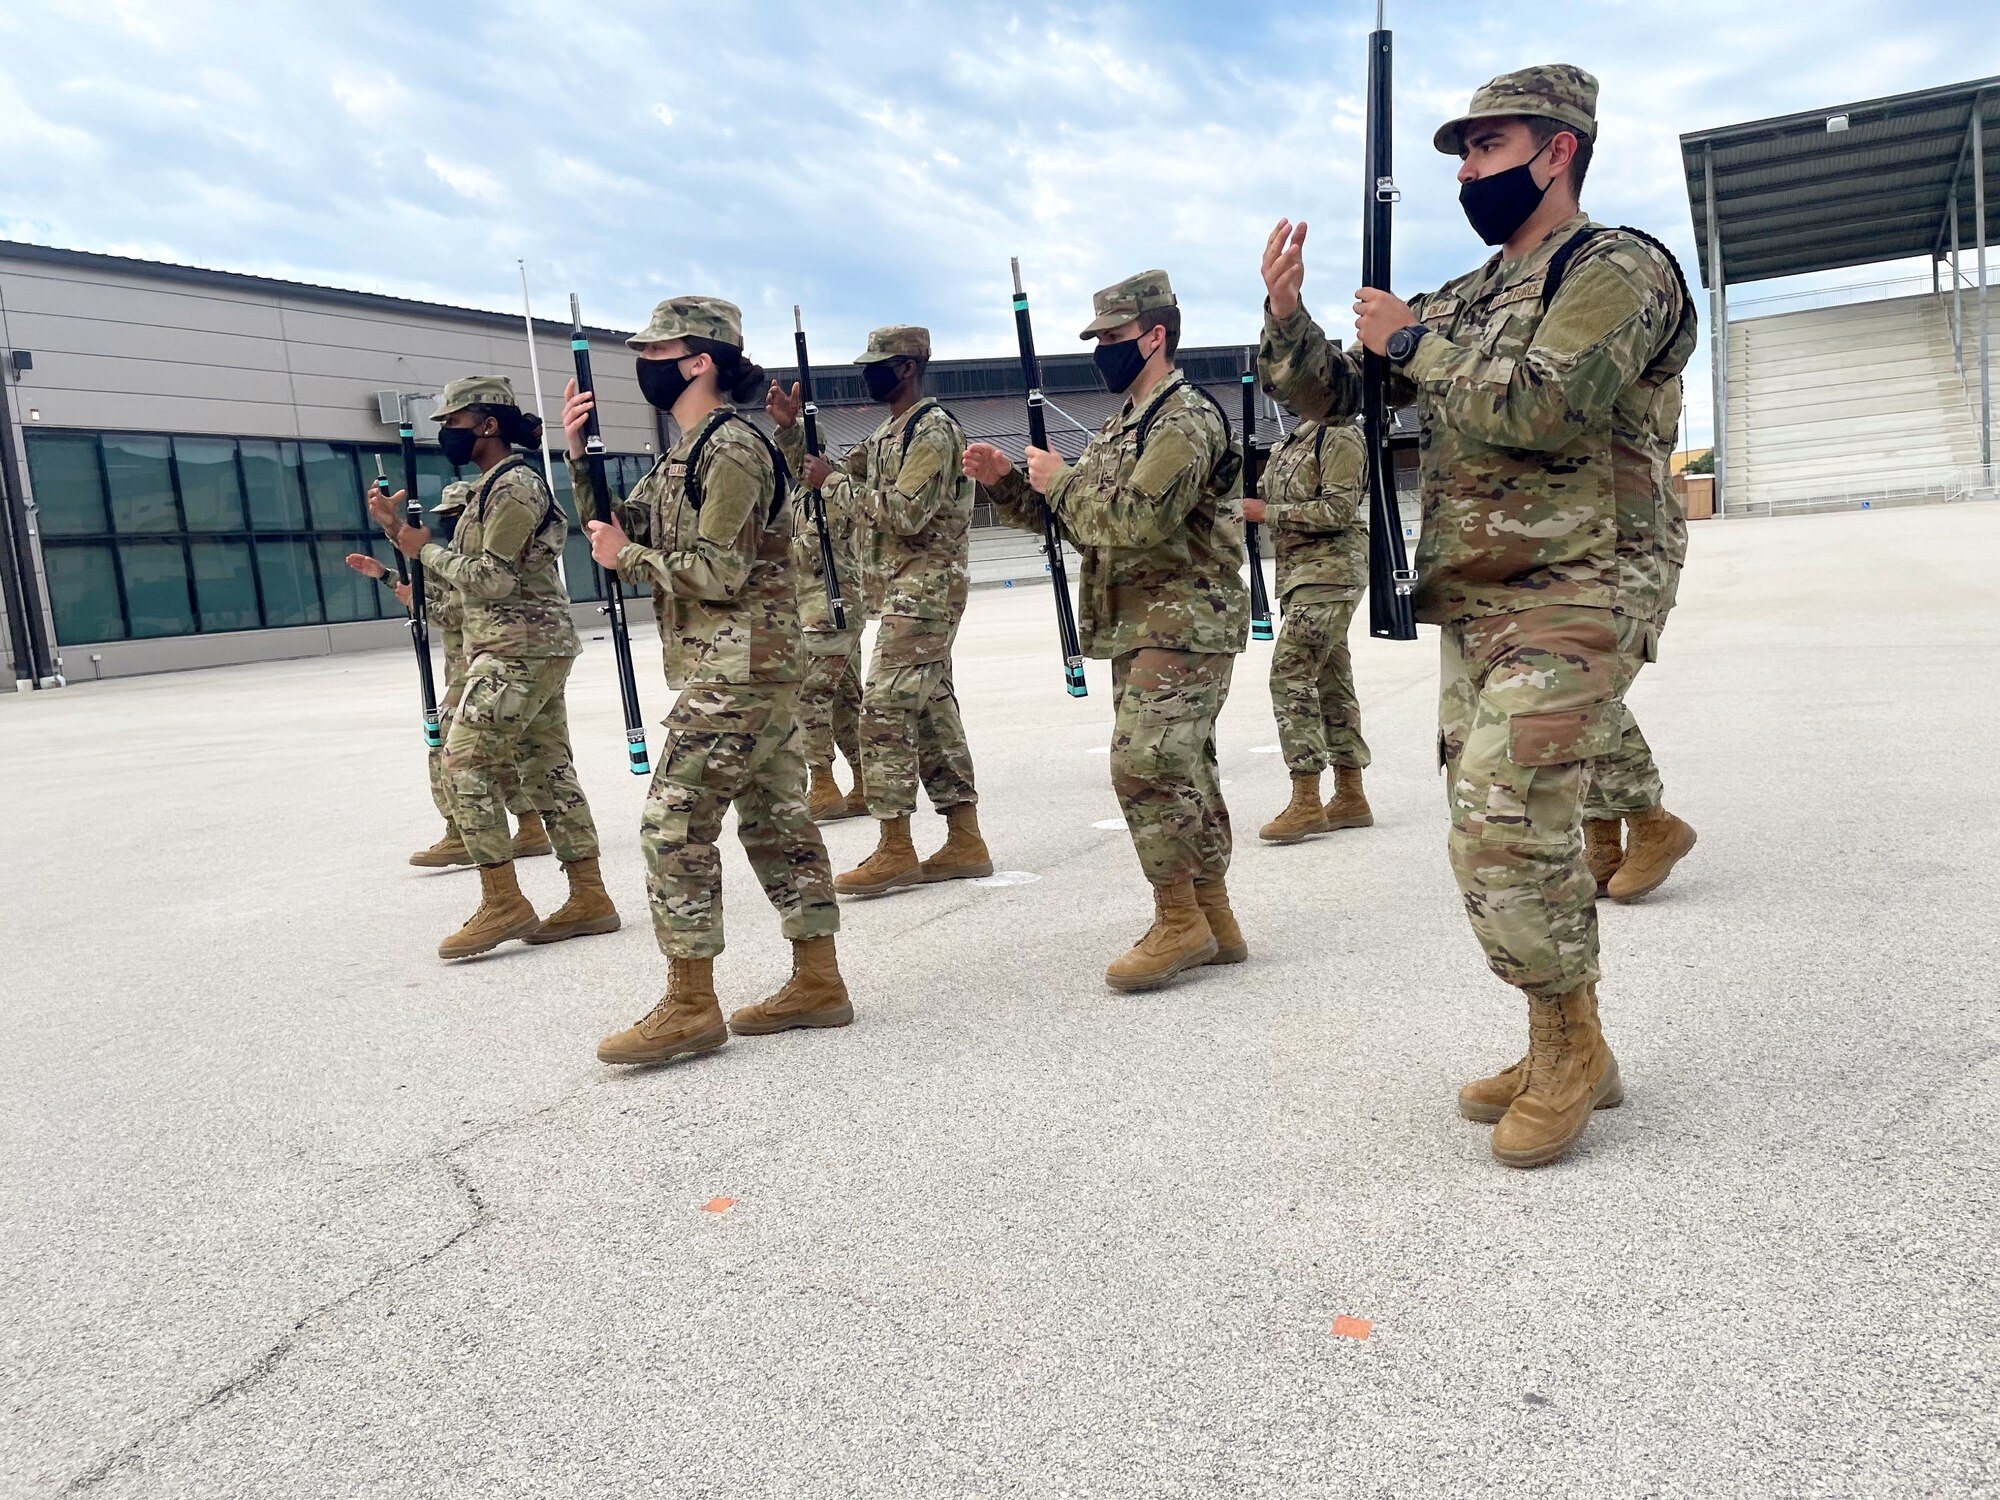 JOINT BASE SAN ANTONIO-LACKLAND, Texas – Since 2017, the 37th Training Wing hosted the Drill Down Invitational. Due to the COVID-19 pandemic, the prospects of holding an in-person invitational this year were bleak.